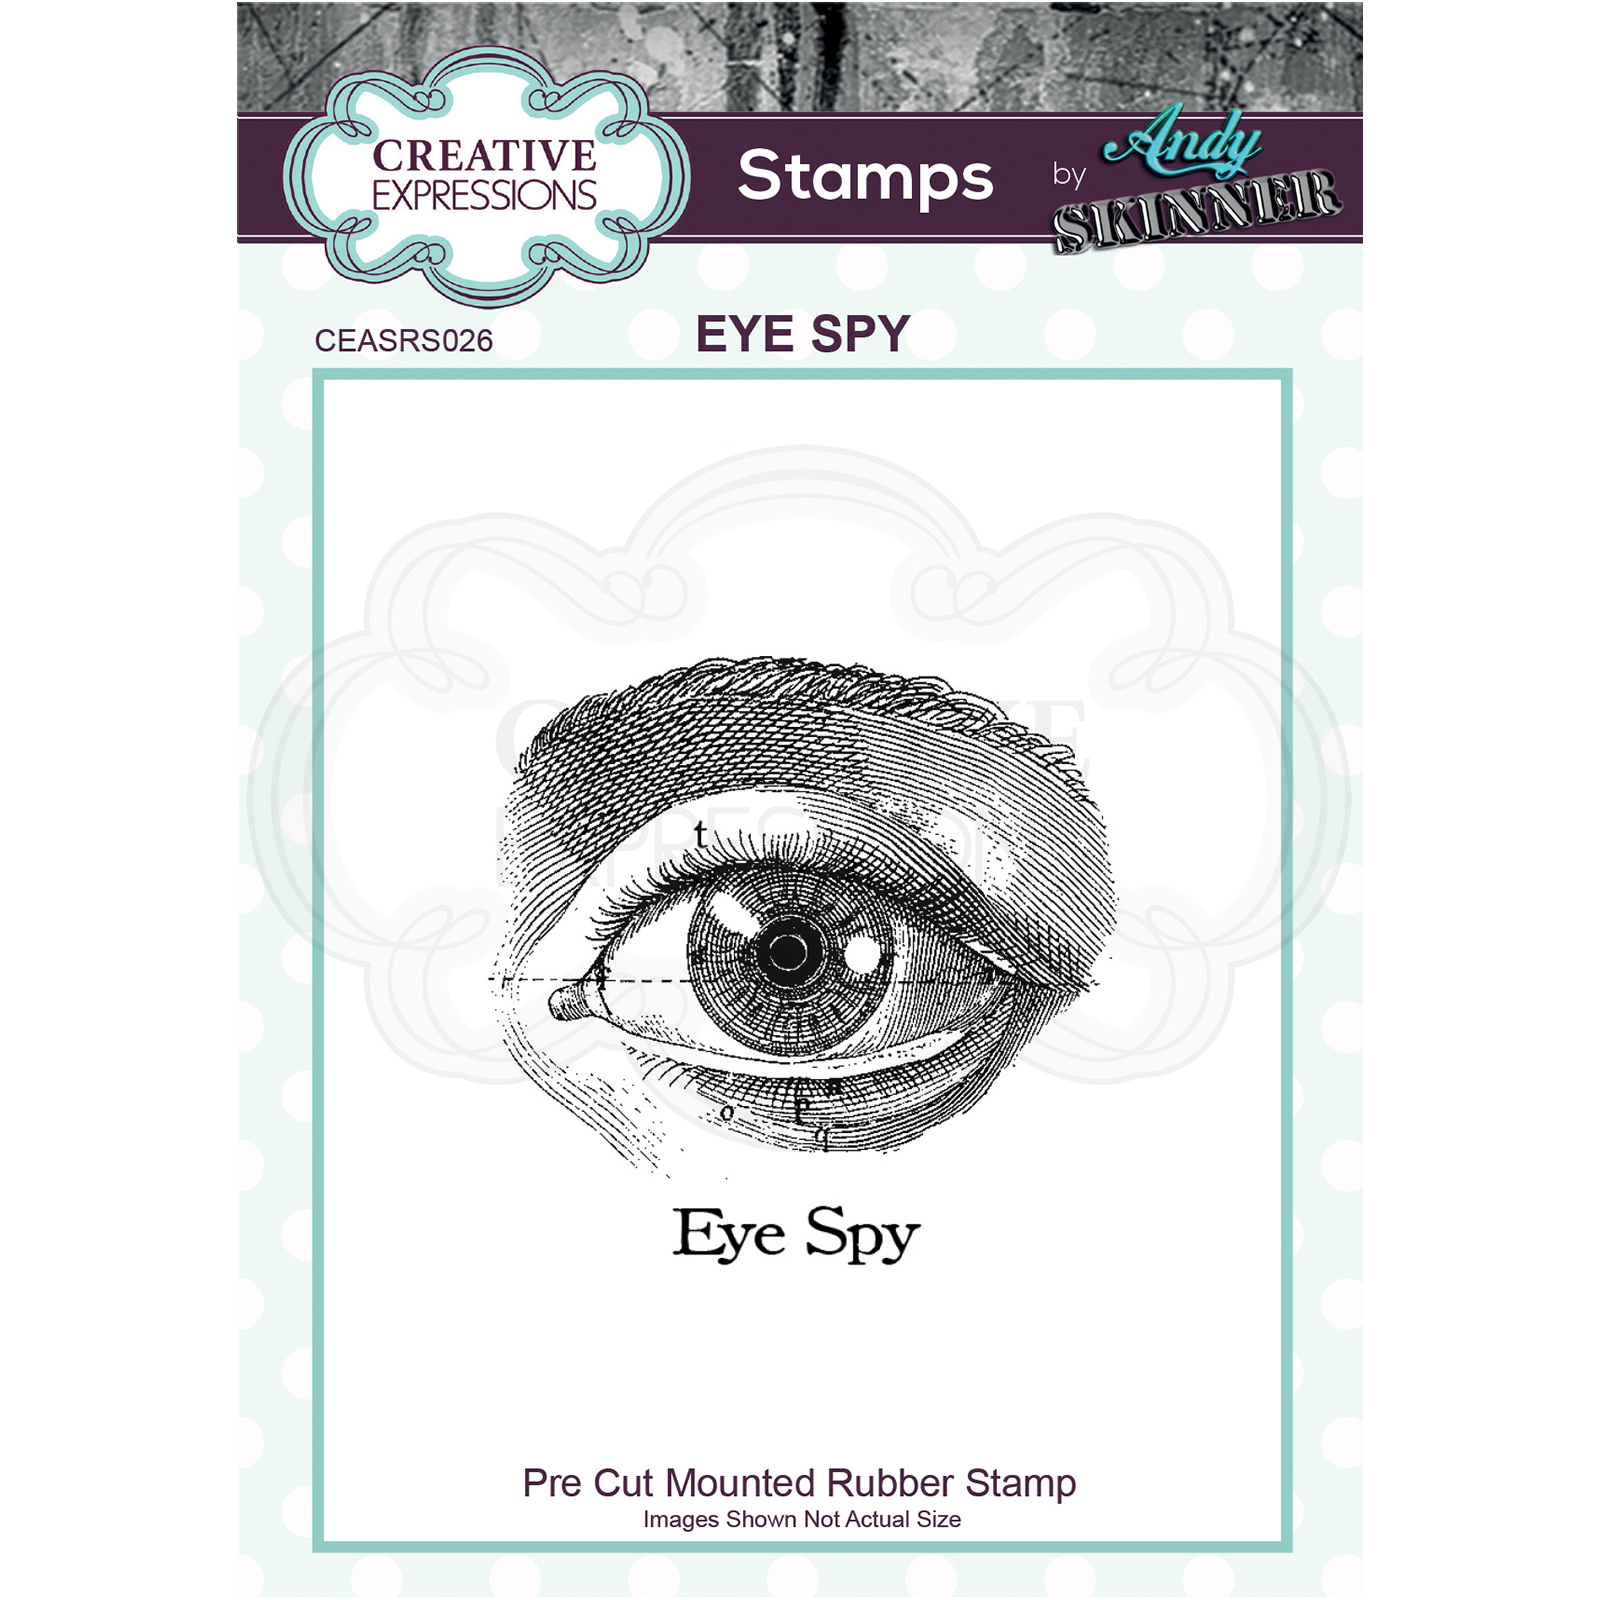 Creative Expressions • Pre Cut Rubber Stamp Andy Skinner Eye Spy